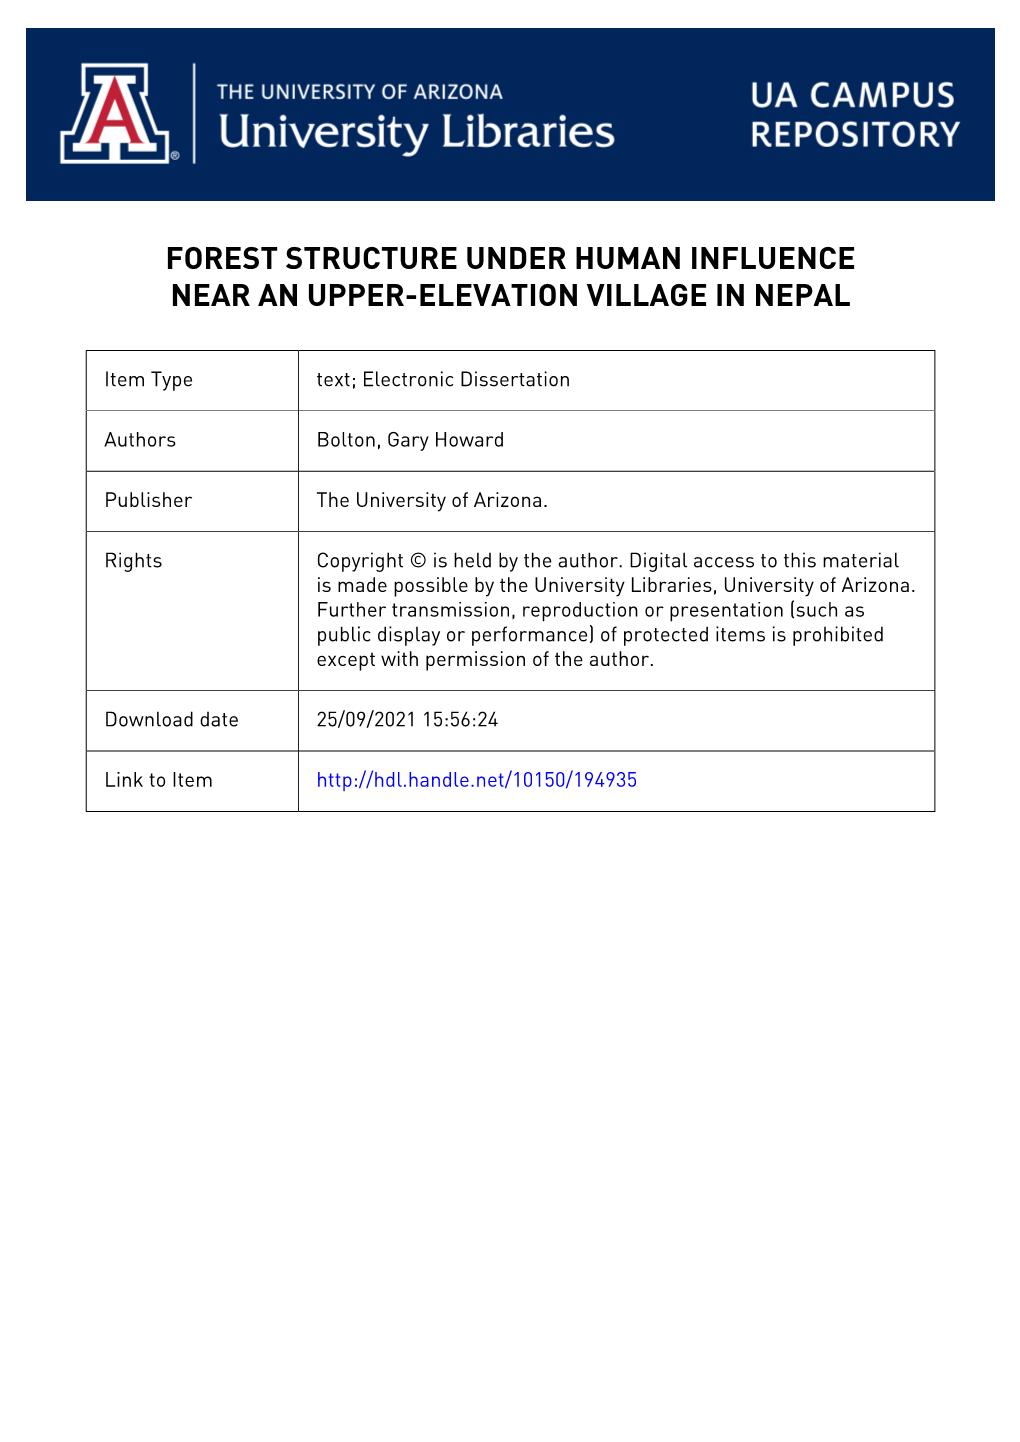 Forest Structure Under Human Influence Near an Upper-Elevation Village in Nepal